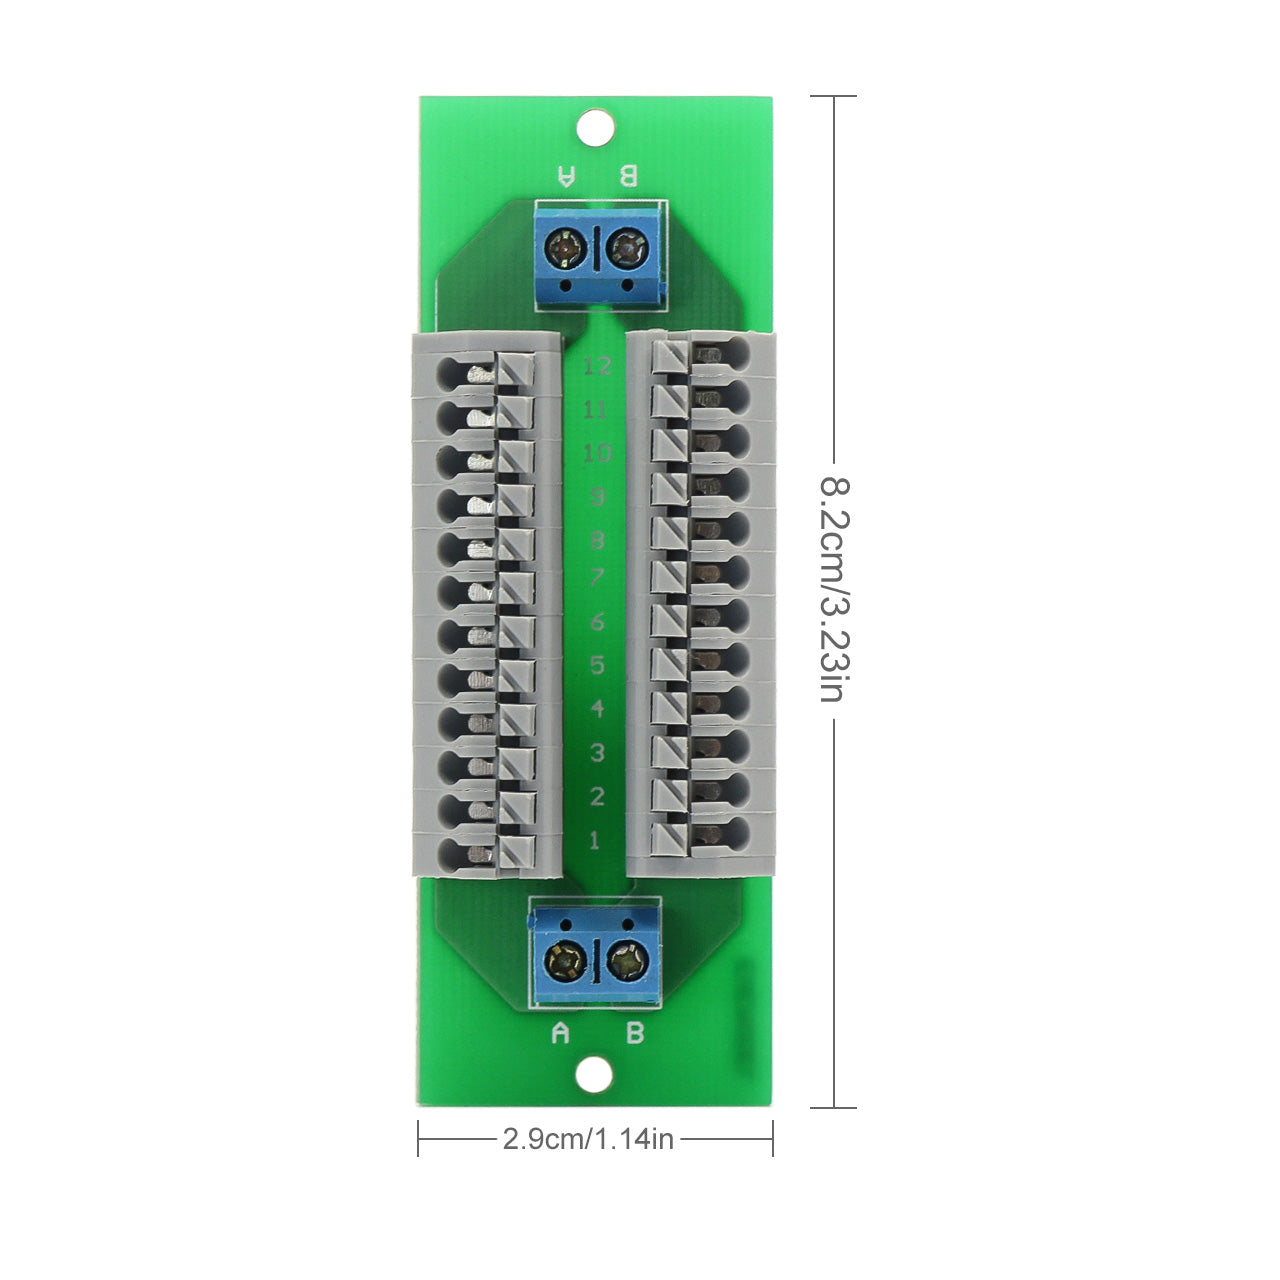 PCB008 1 Set Power Distribution Board 2 Inputs 13 pairs Output without Screw